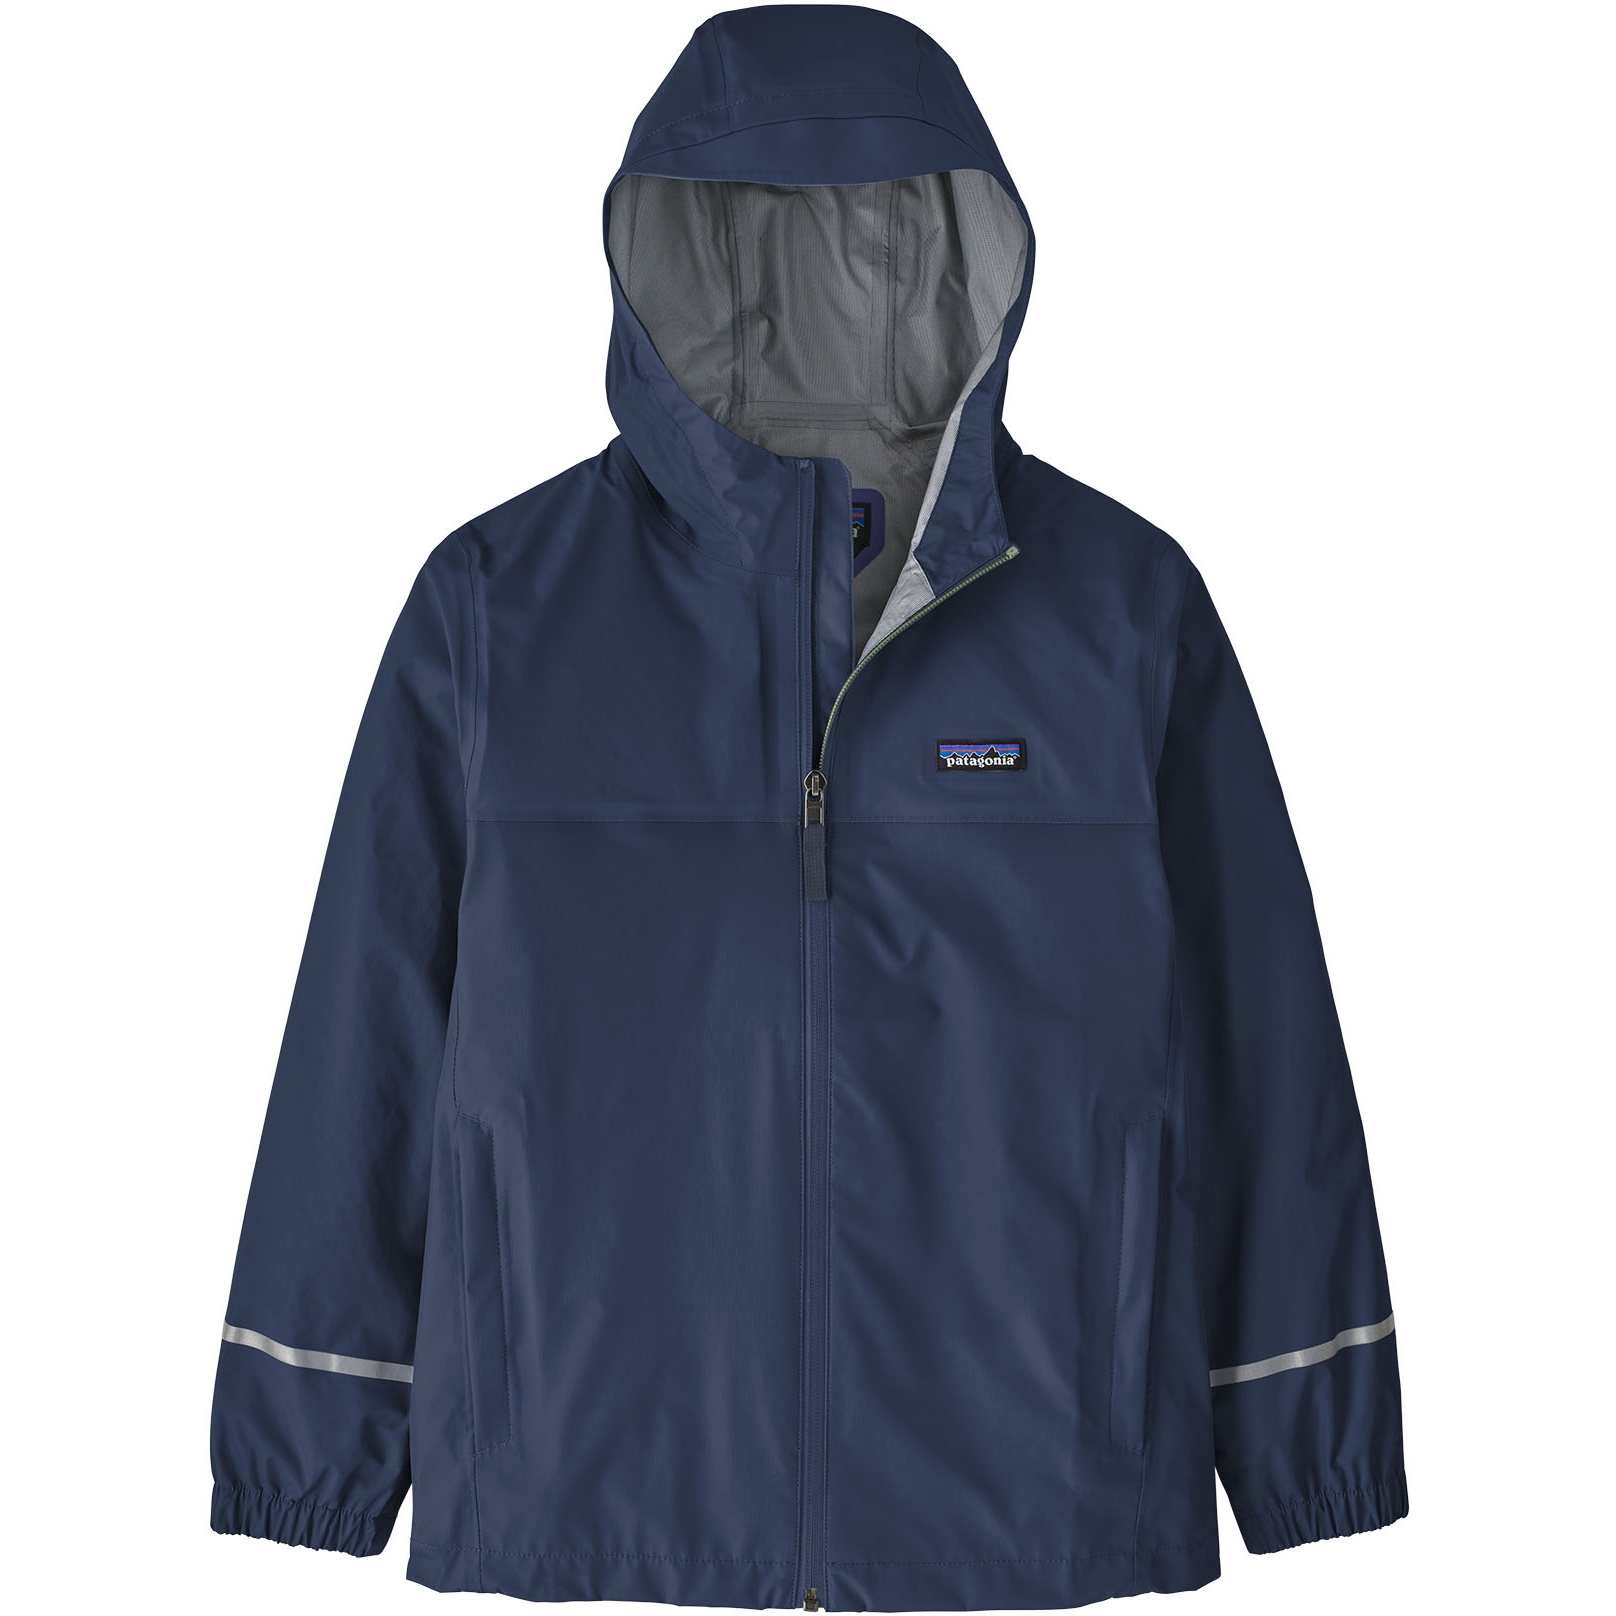 Picture of Patagonia Torrentshell 3L Rain Jacket Kids - New Navy